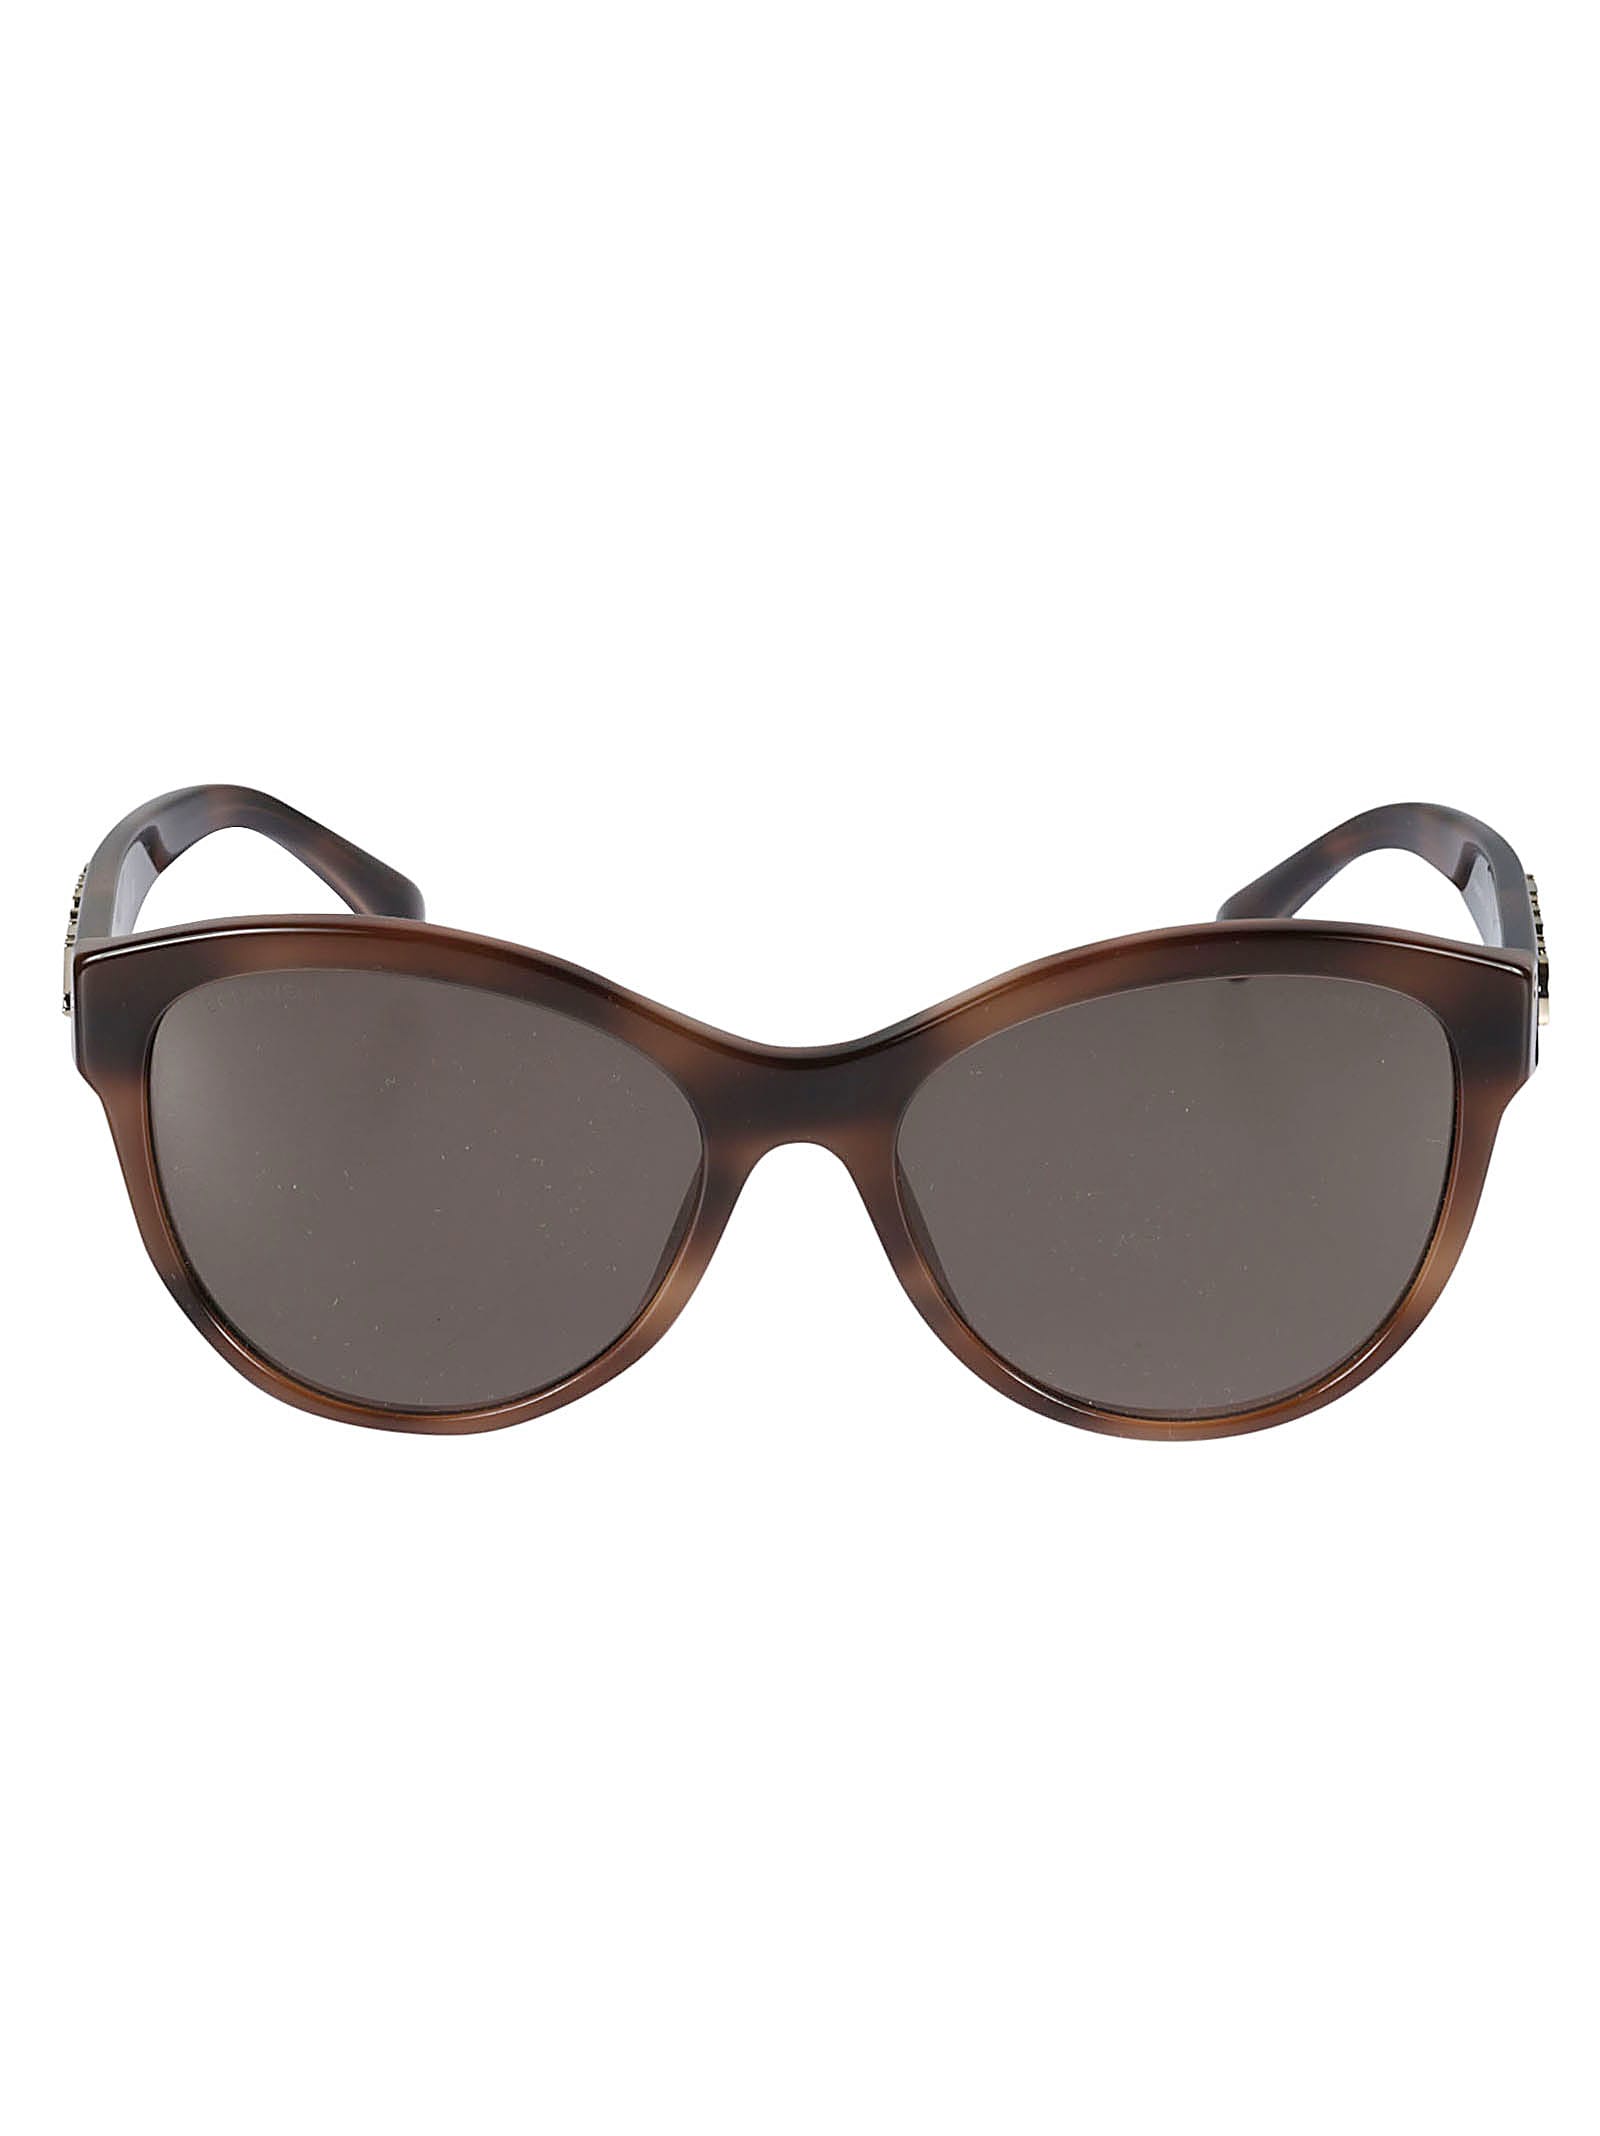 Chanel Butterfly Acetate Sunglasses - 1661/3 - female - Size: 0one size